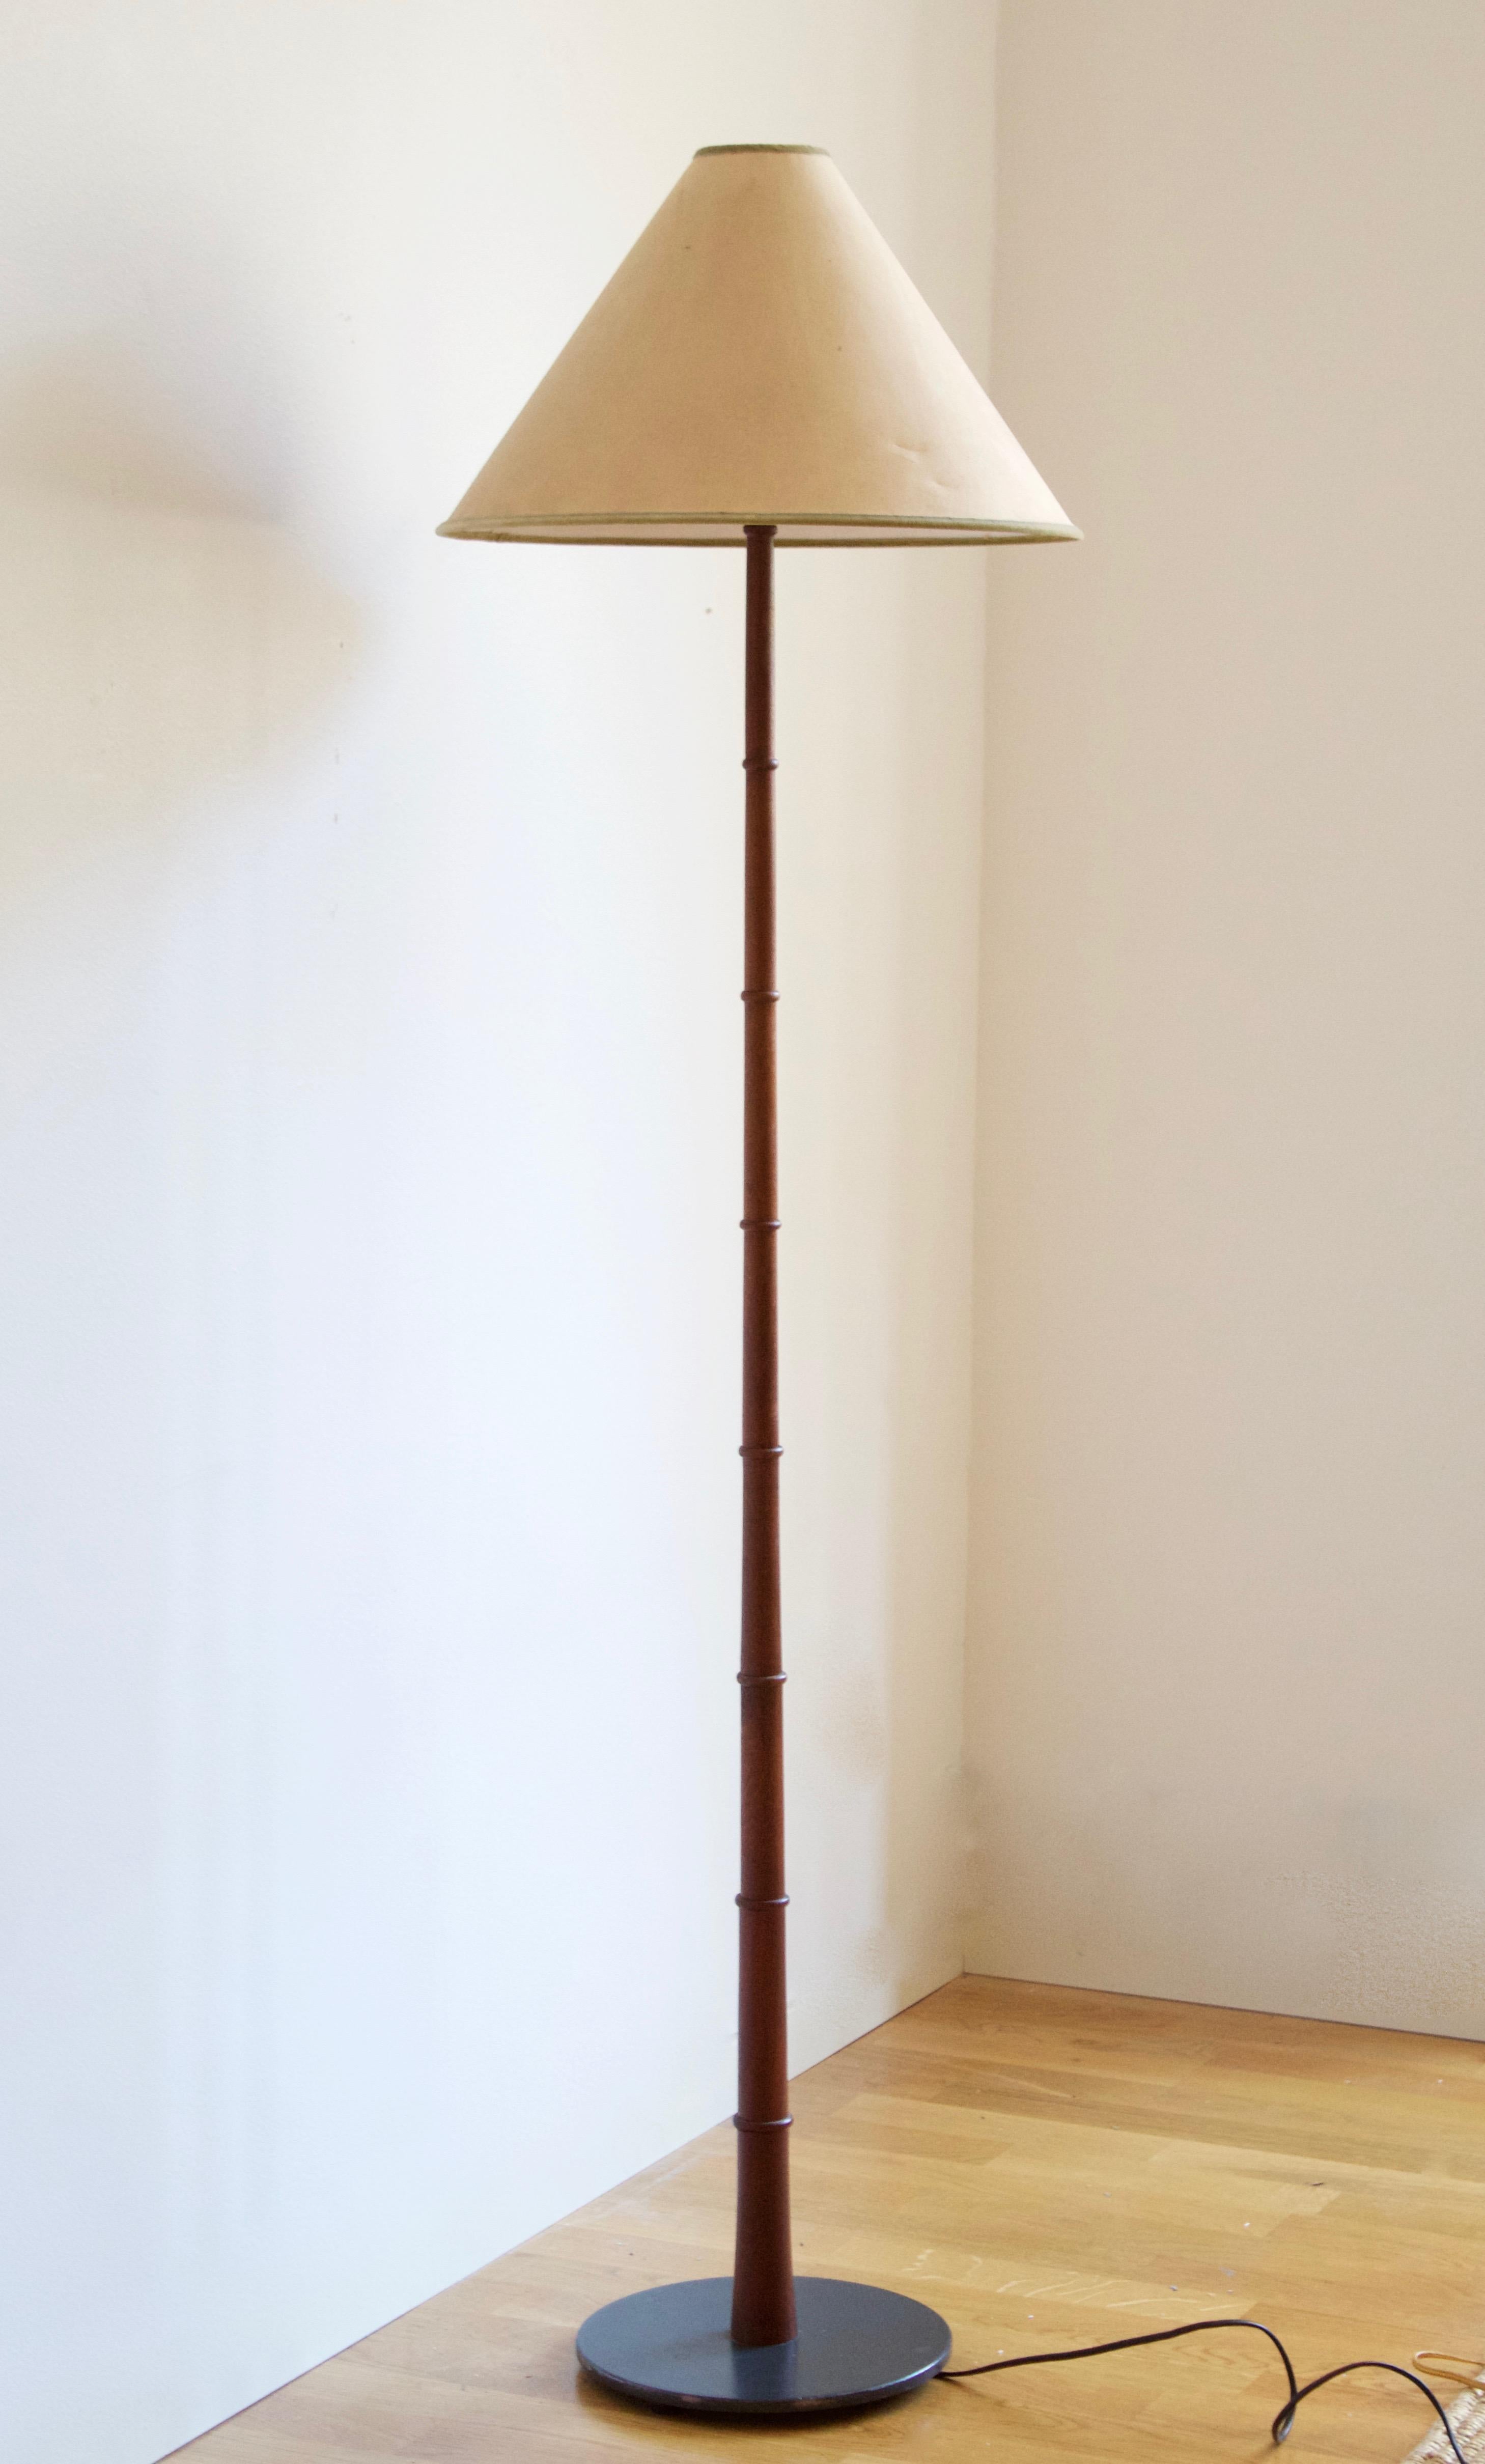 An adjustable modernist floor lamp, design attributed to Svend Aage Holm Sørensen, Denmark, 1950s. Assorted vintage lampshade of the period.

In teak, black painted metal foot.

Other designers of the period include Paavo Tynell, Serge Mouille,